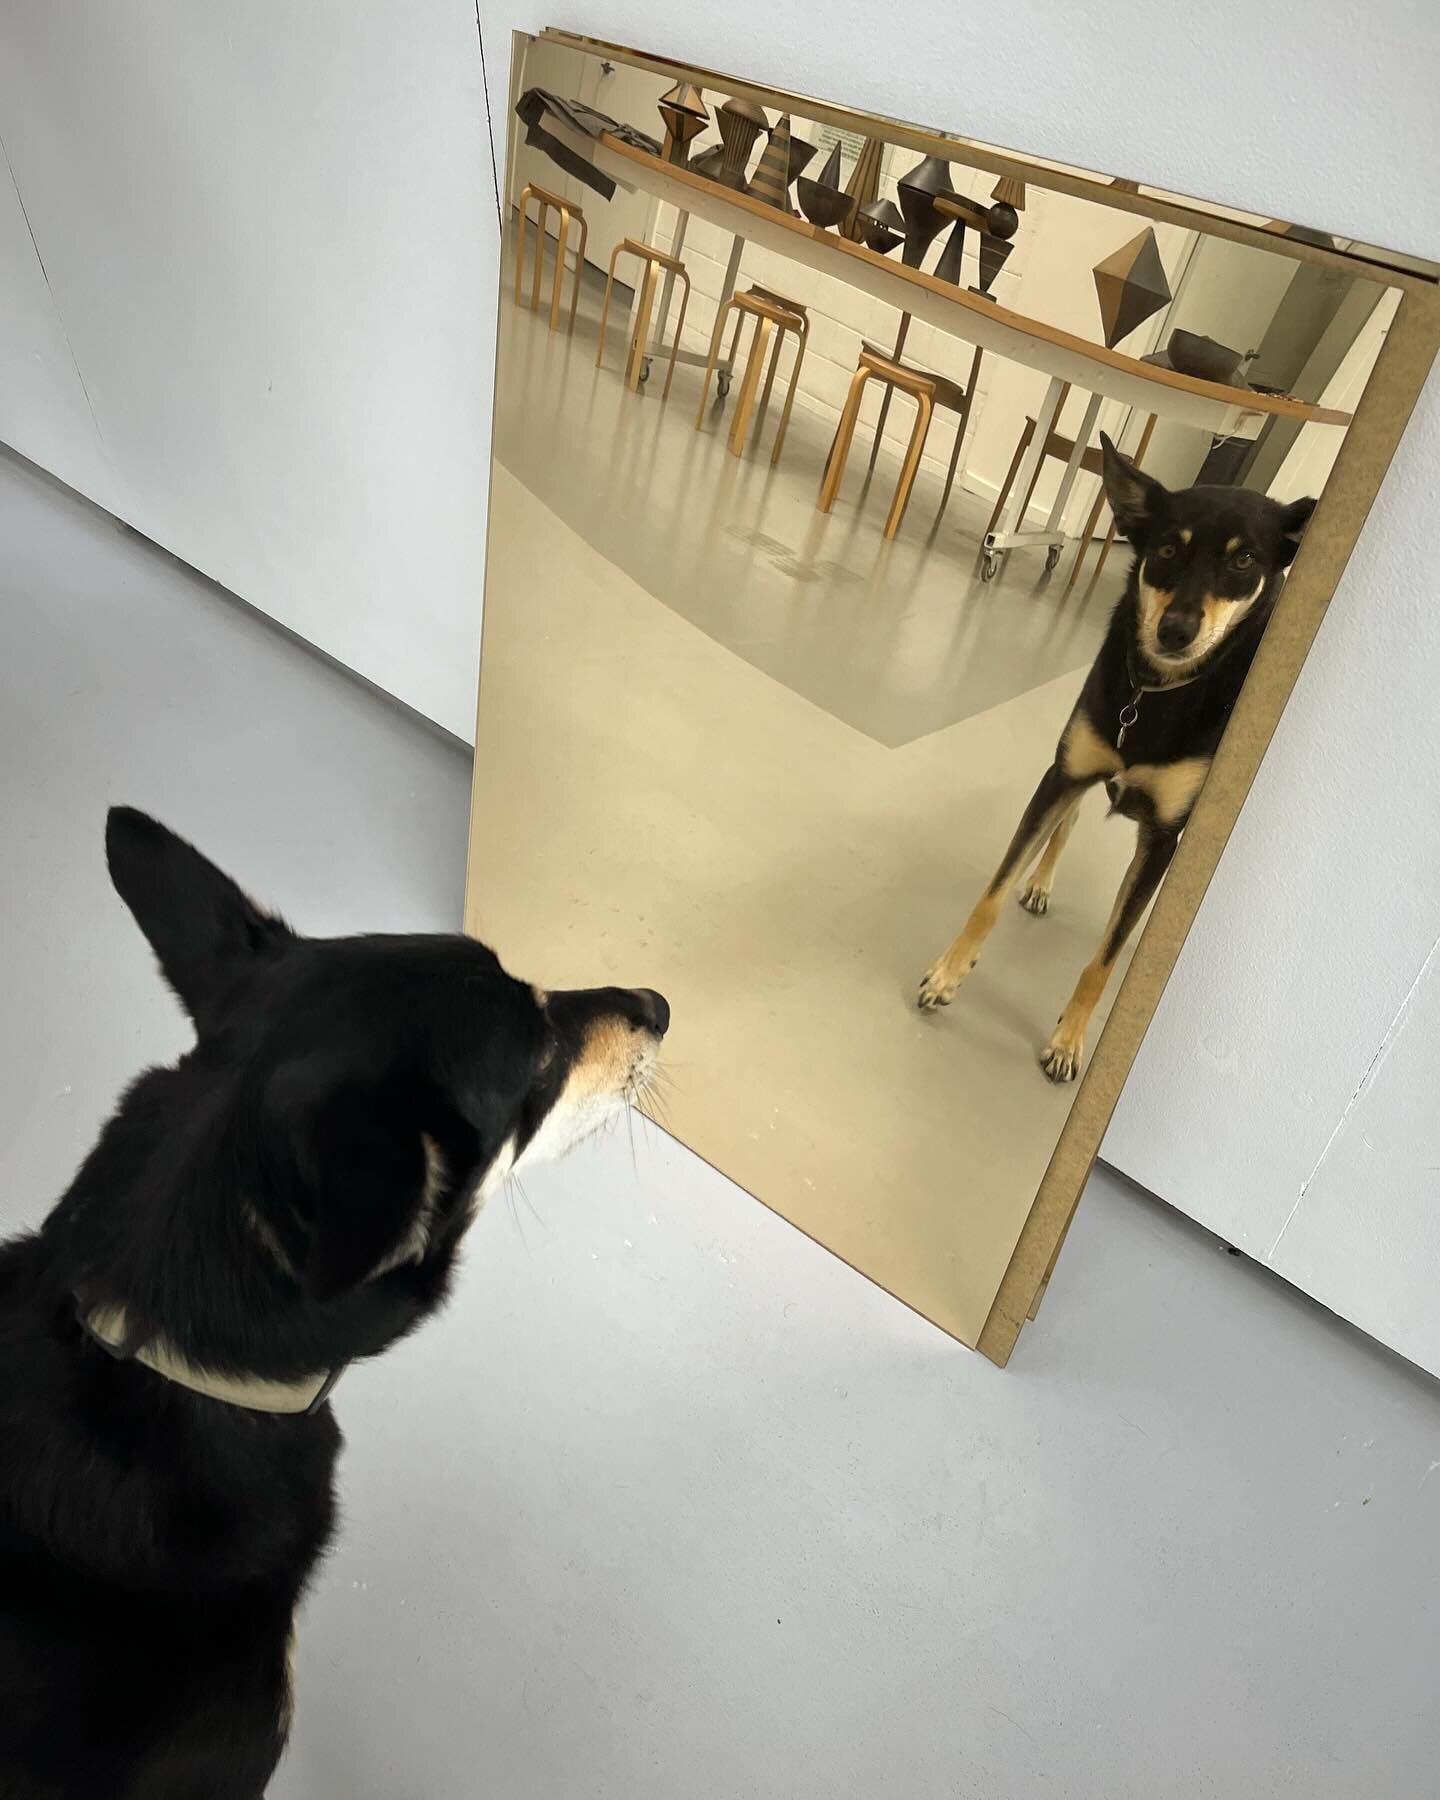 Bonnie having her Narcissus moment. BTS of Belinda Wiltshire&rsquo;s freshly completed exhibition Echo, a debut collection of sculptural ceramics, reflected in golden glory!